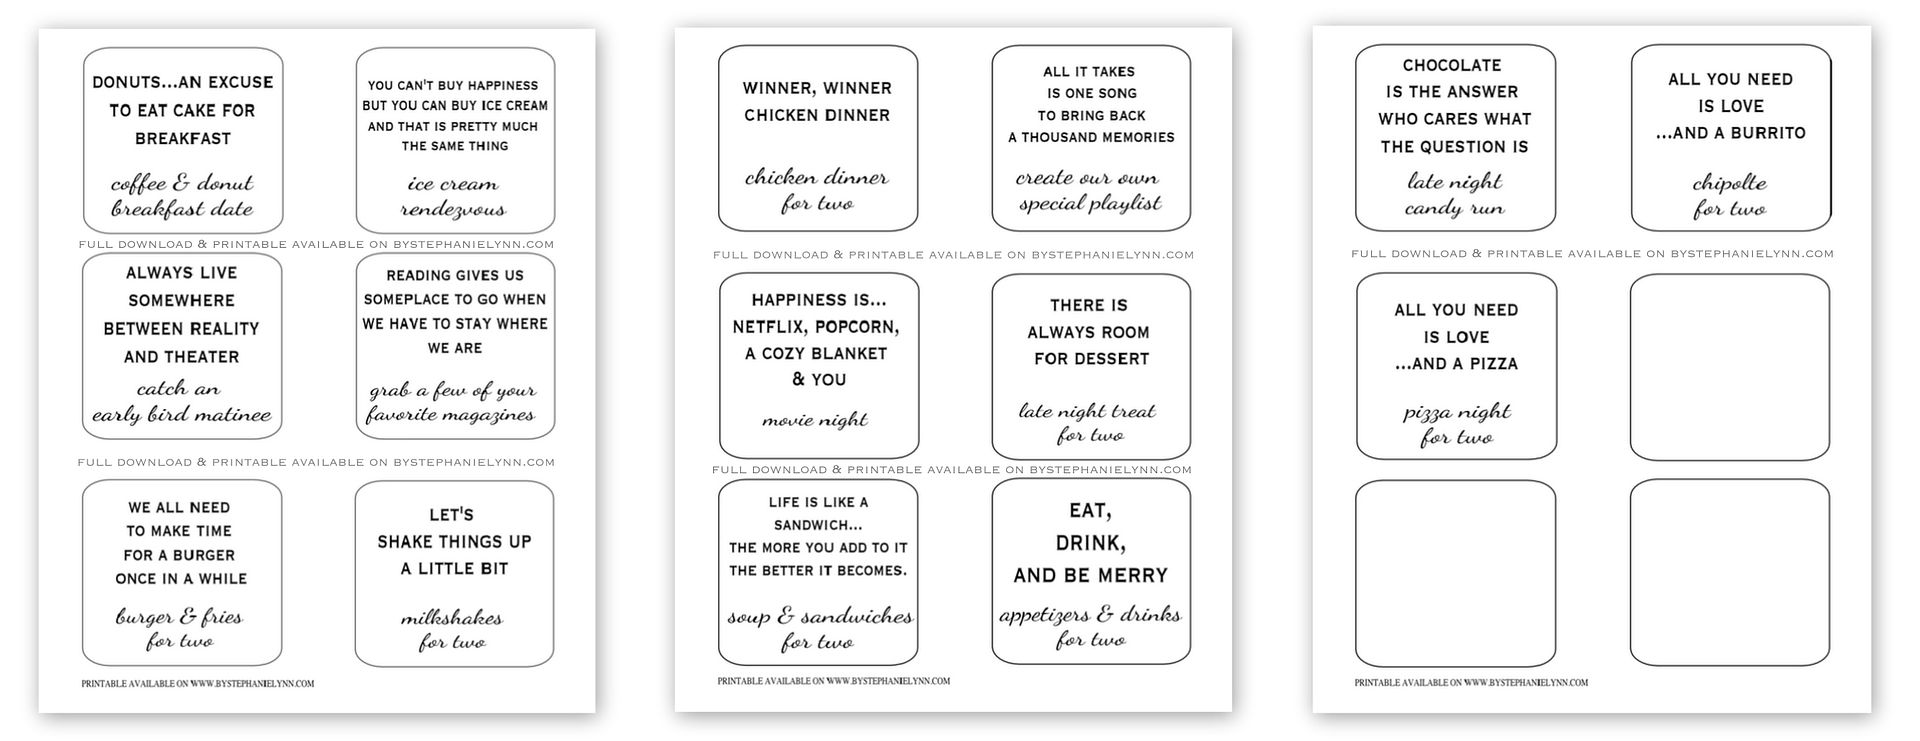 Date Night Gift Card Ideas Download and Printables bystephanielynn.com 